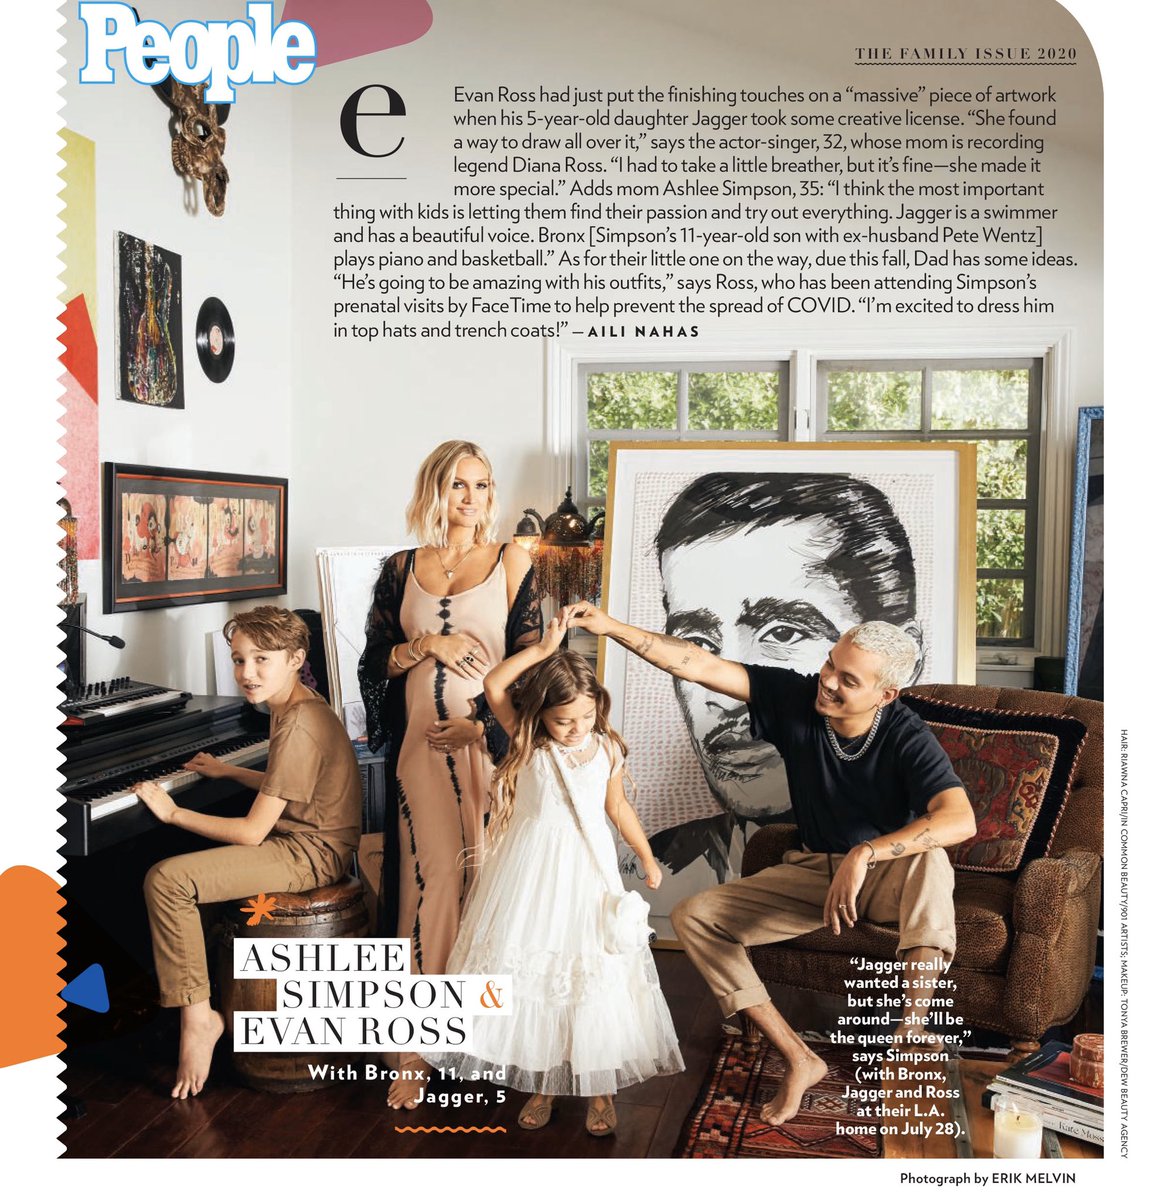 Soon to be a family of 5! Thank you @people for featuring us in the Family issue! 